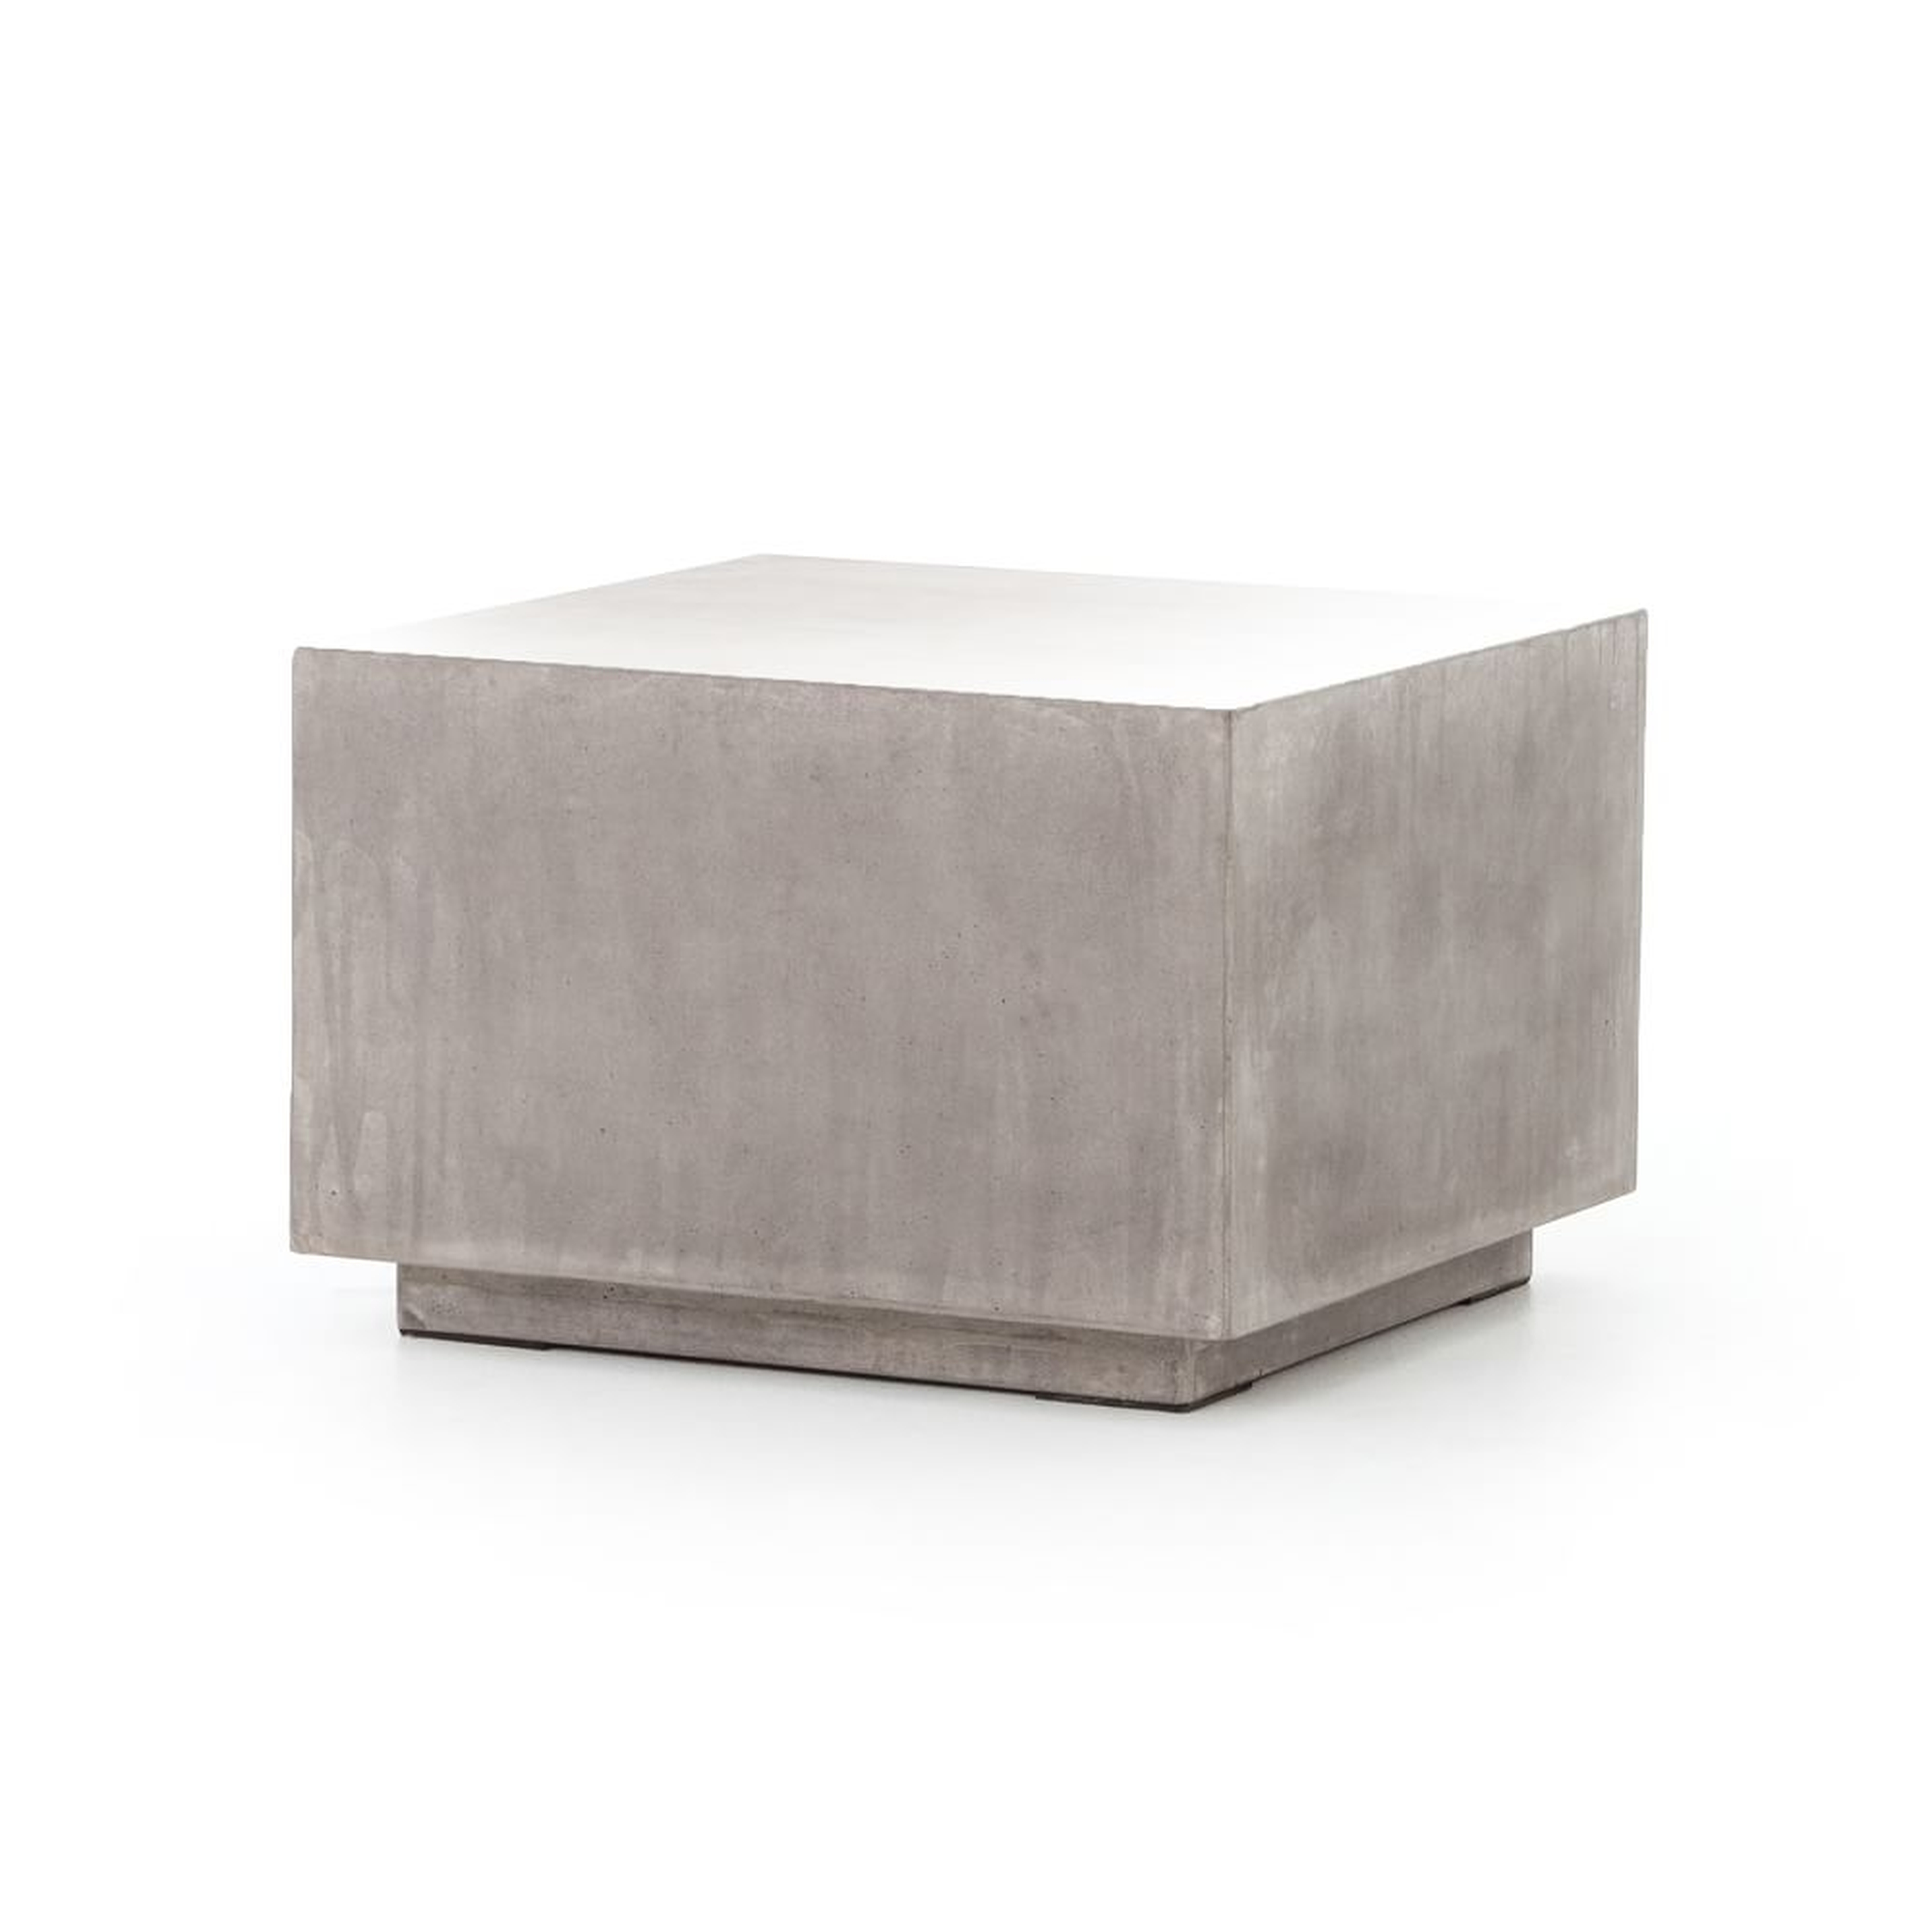 Angled Concrete 24" Outdoor Square Coffee Table - West Elm